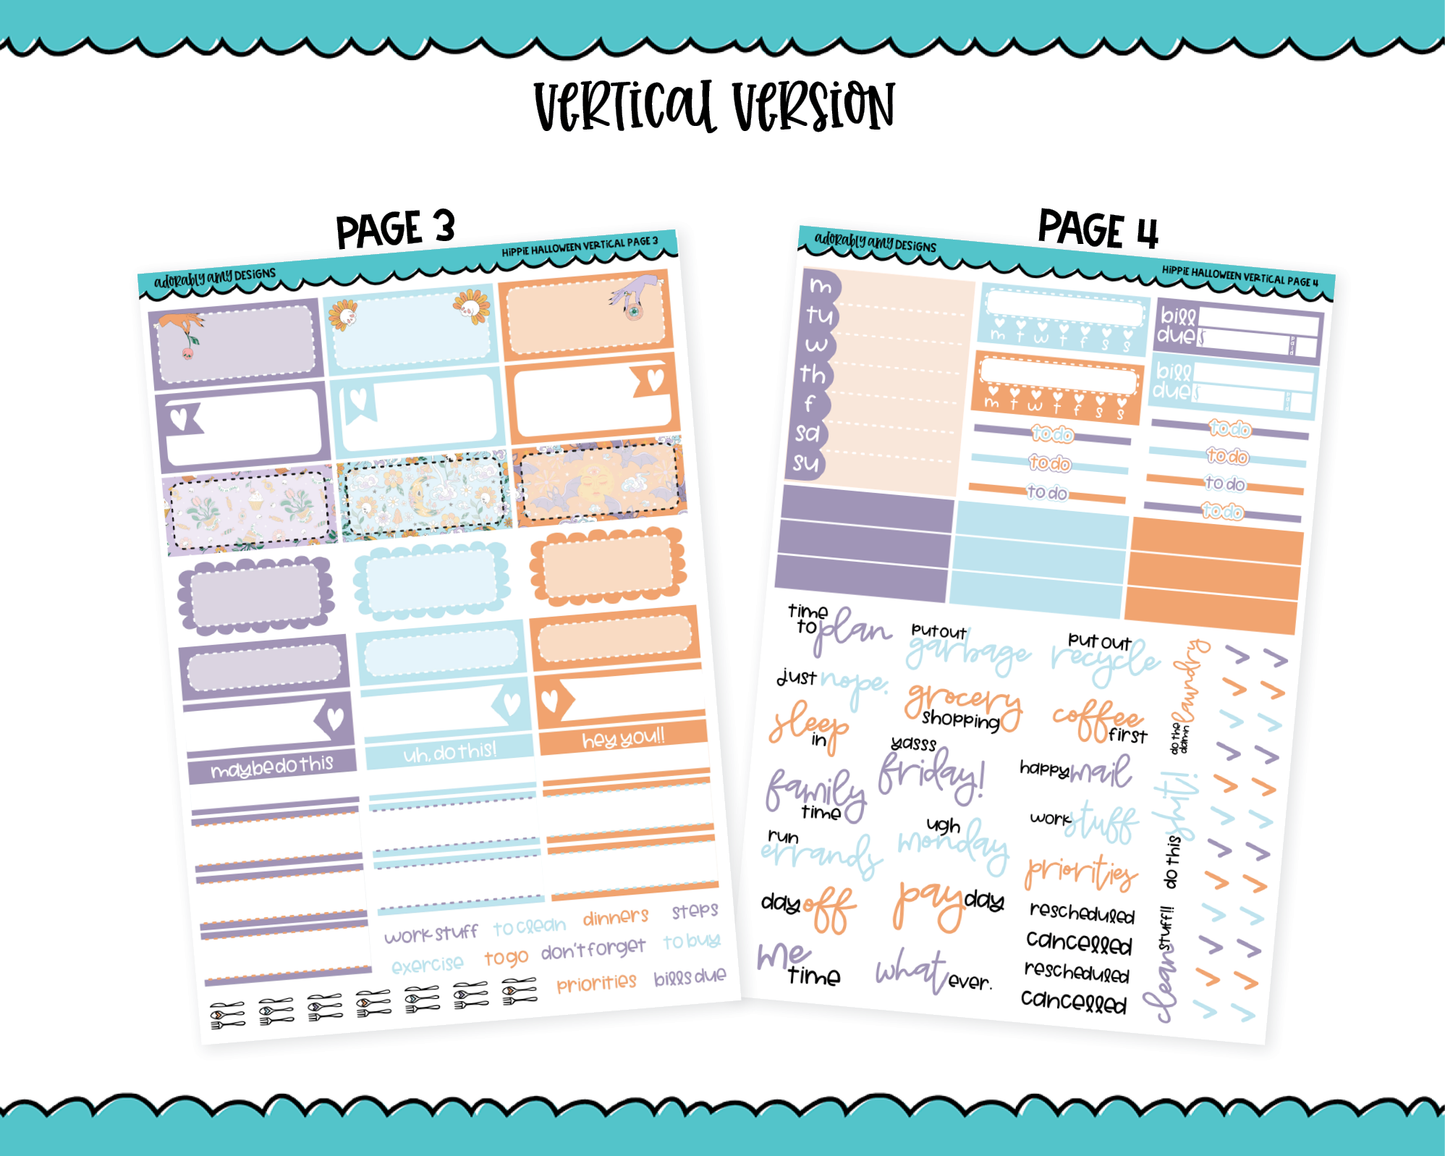 Vertical Hippie Halloween Themed Planner Sticker Kit for Vertical Standard Size Planners or Inserts